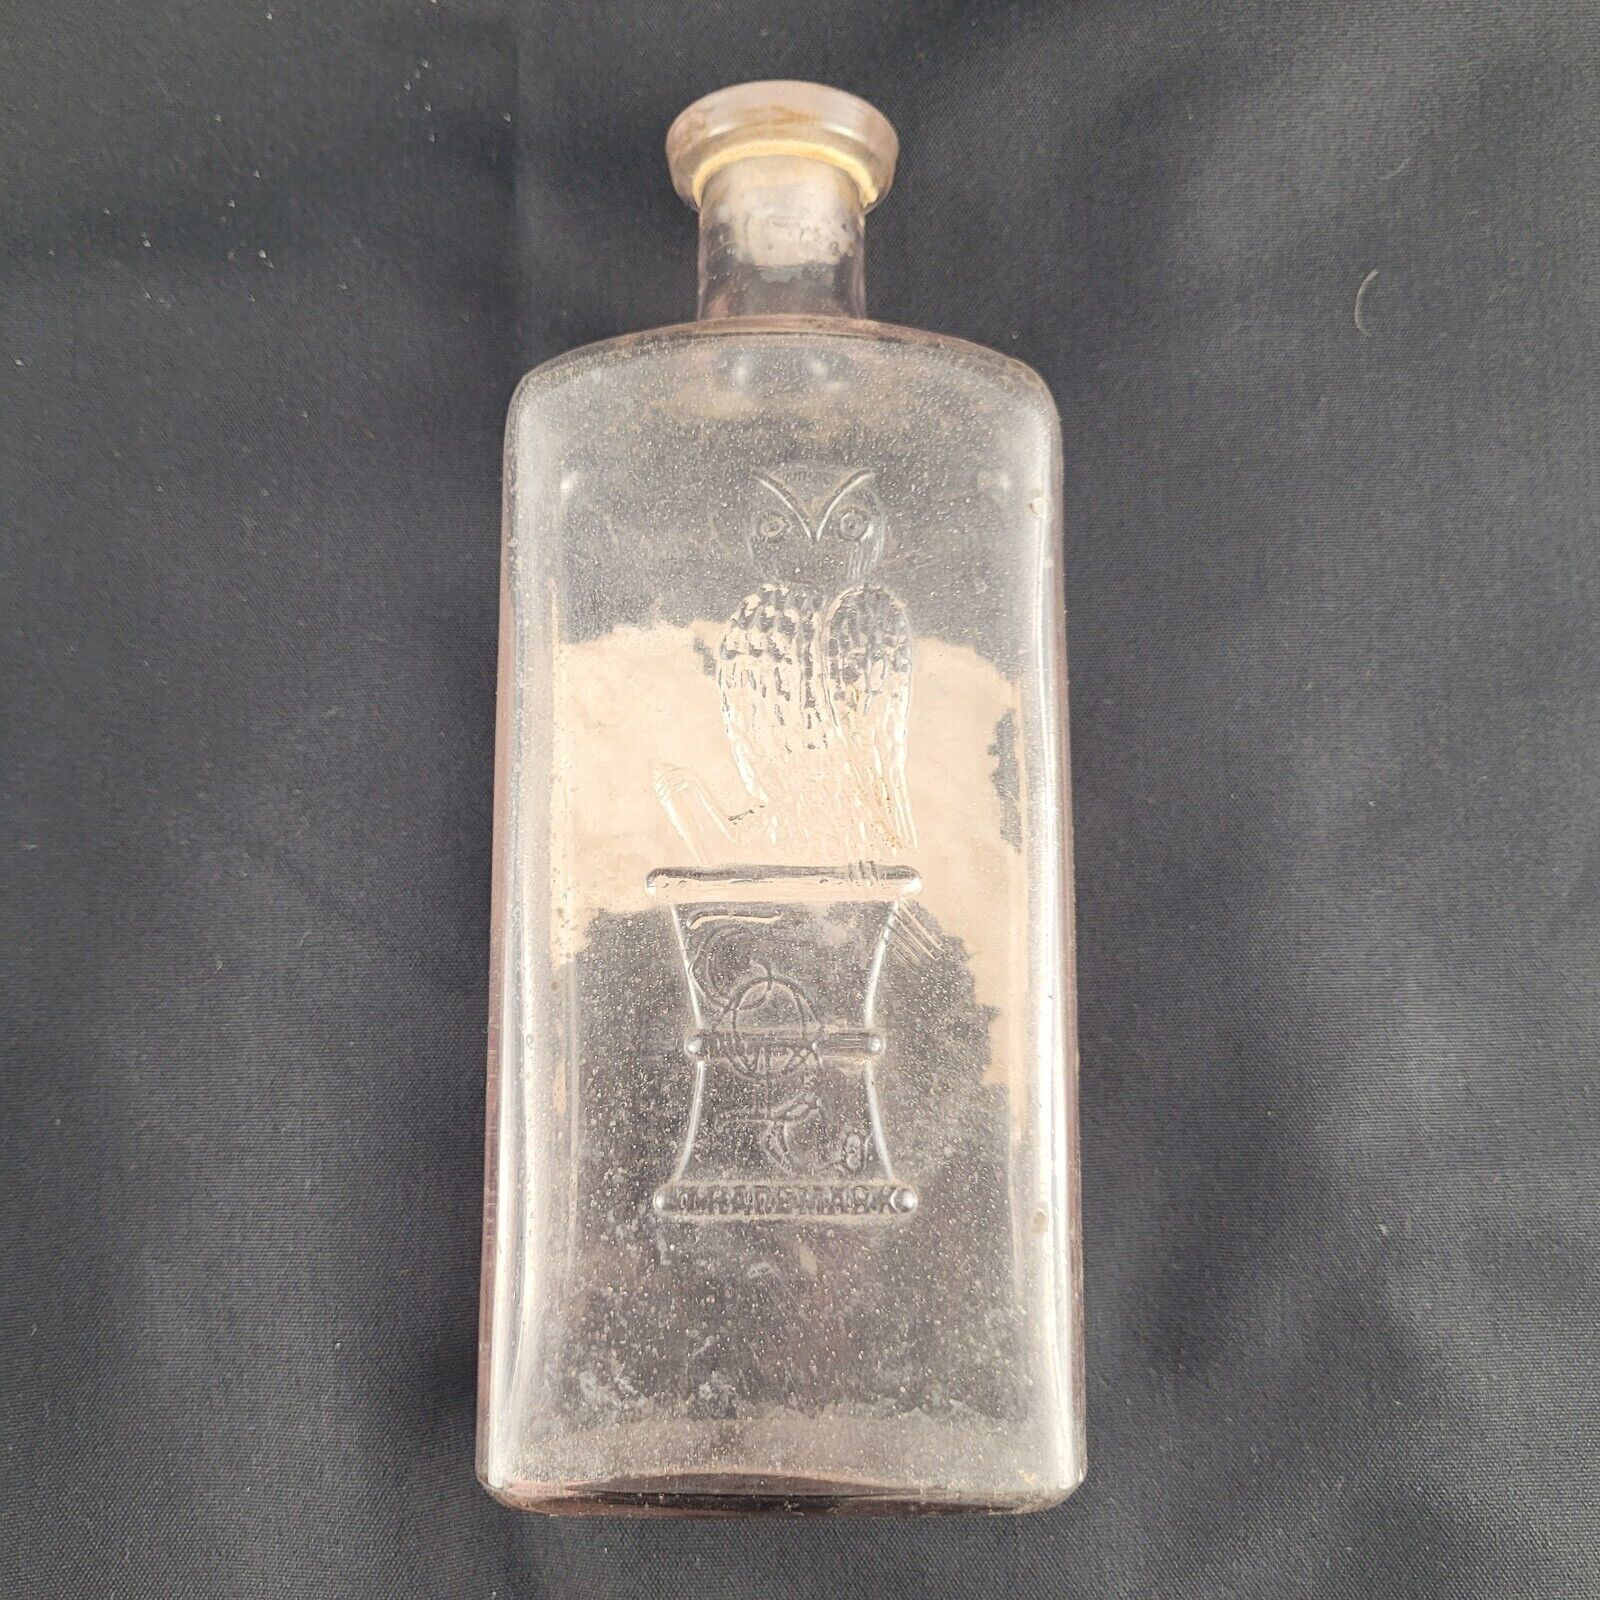 RARE ~ Large Sized OWL DRUG CO. WESTERN MEDICINE BOTTLE With The Grandpappy Owl